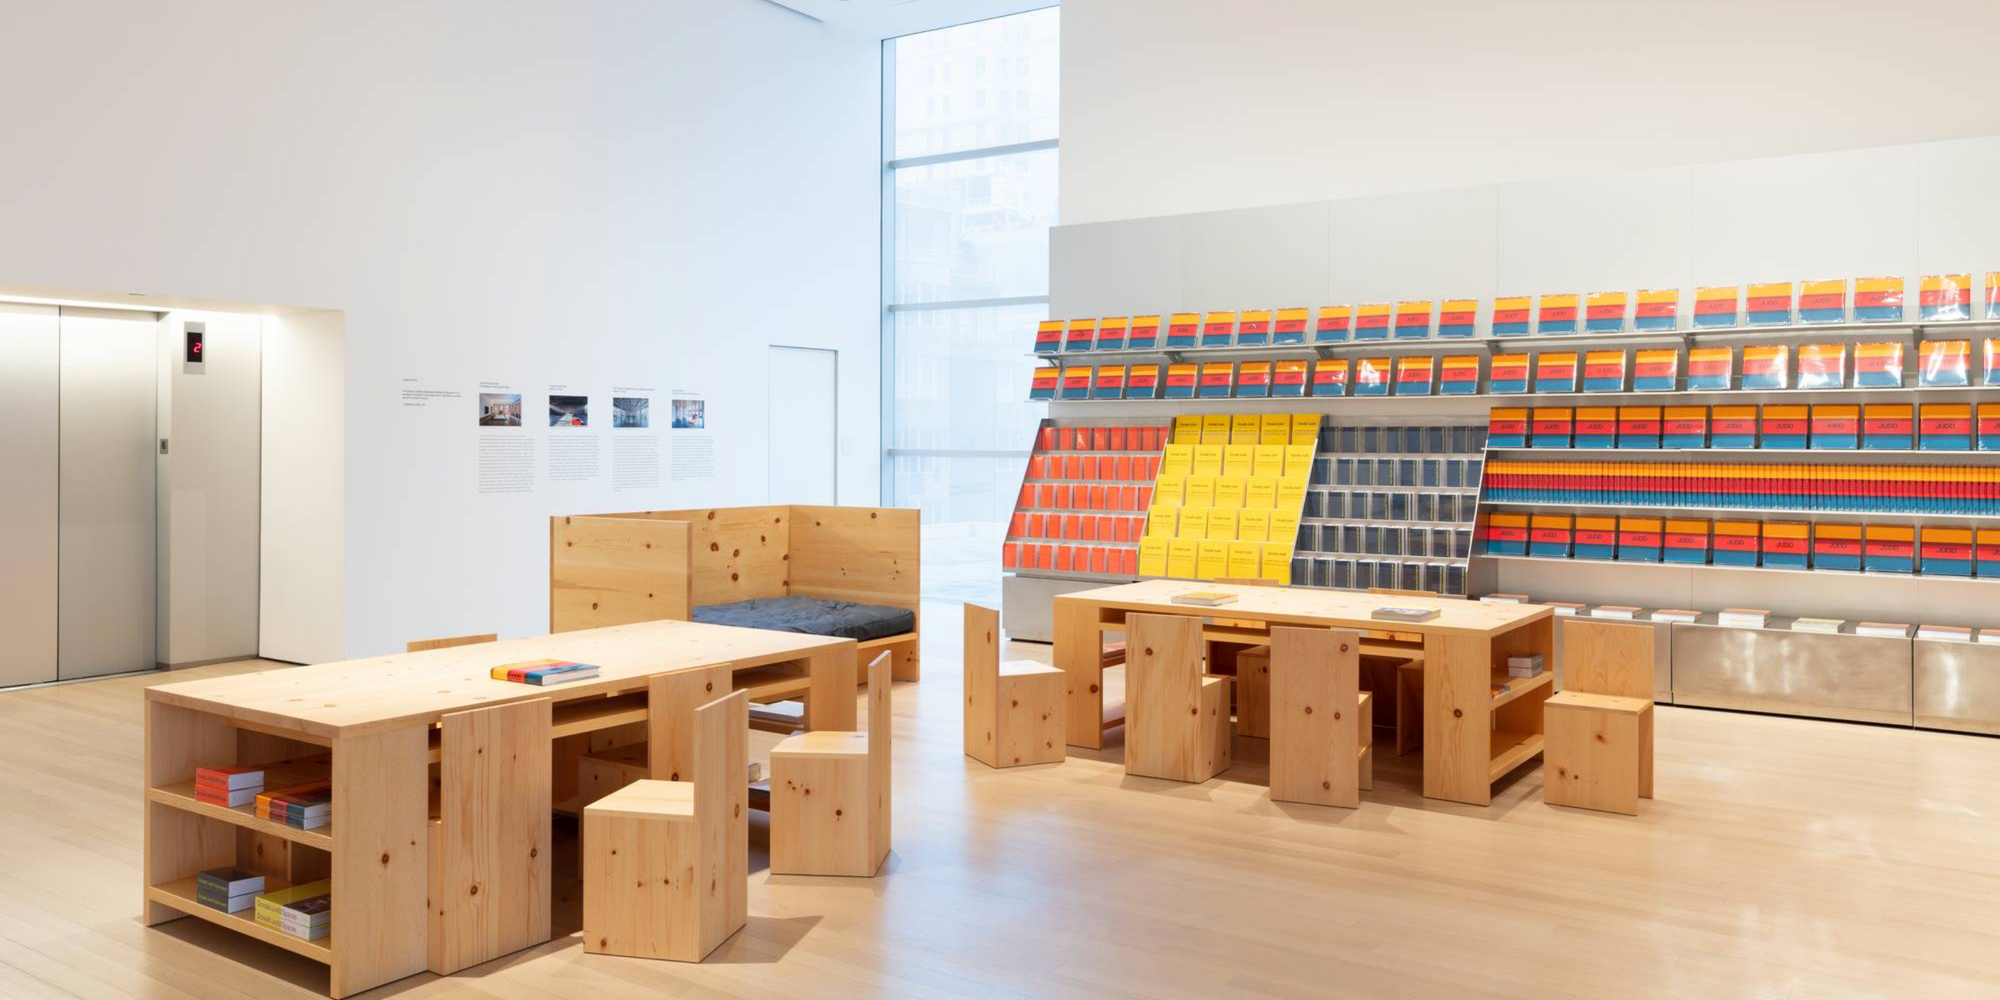 View of the reading area at the entrance to Judd, The Museum of Modern Art, New York, March 1–July 11, 2020. Digital Image © 2020 The Museum of Modern Art, New York. Photo: Jonathan Muzikar